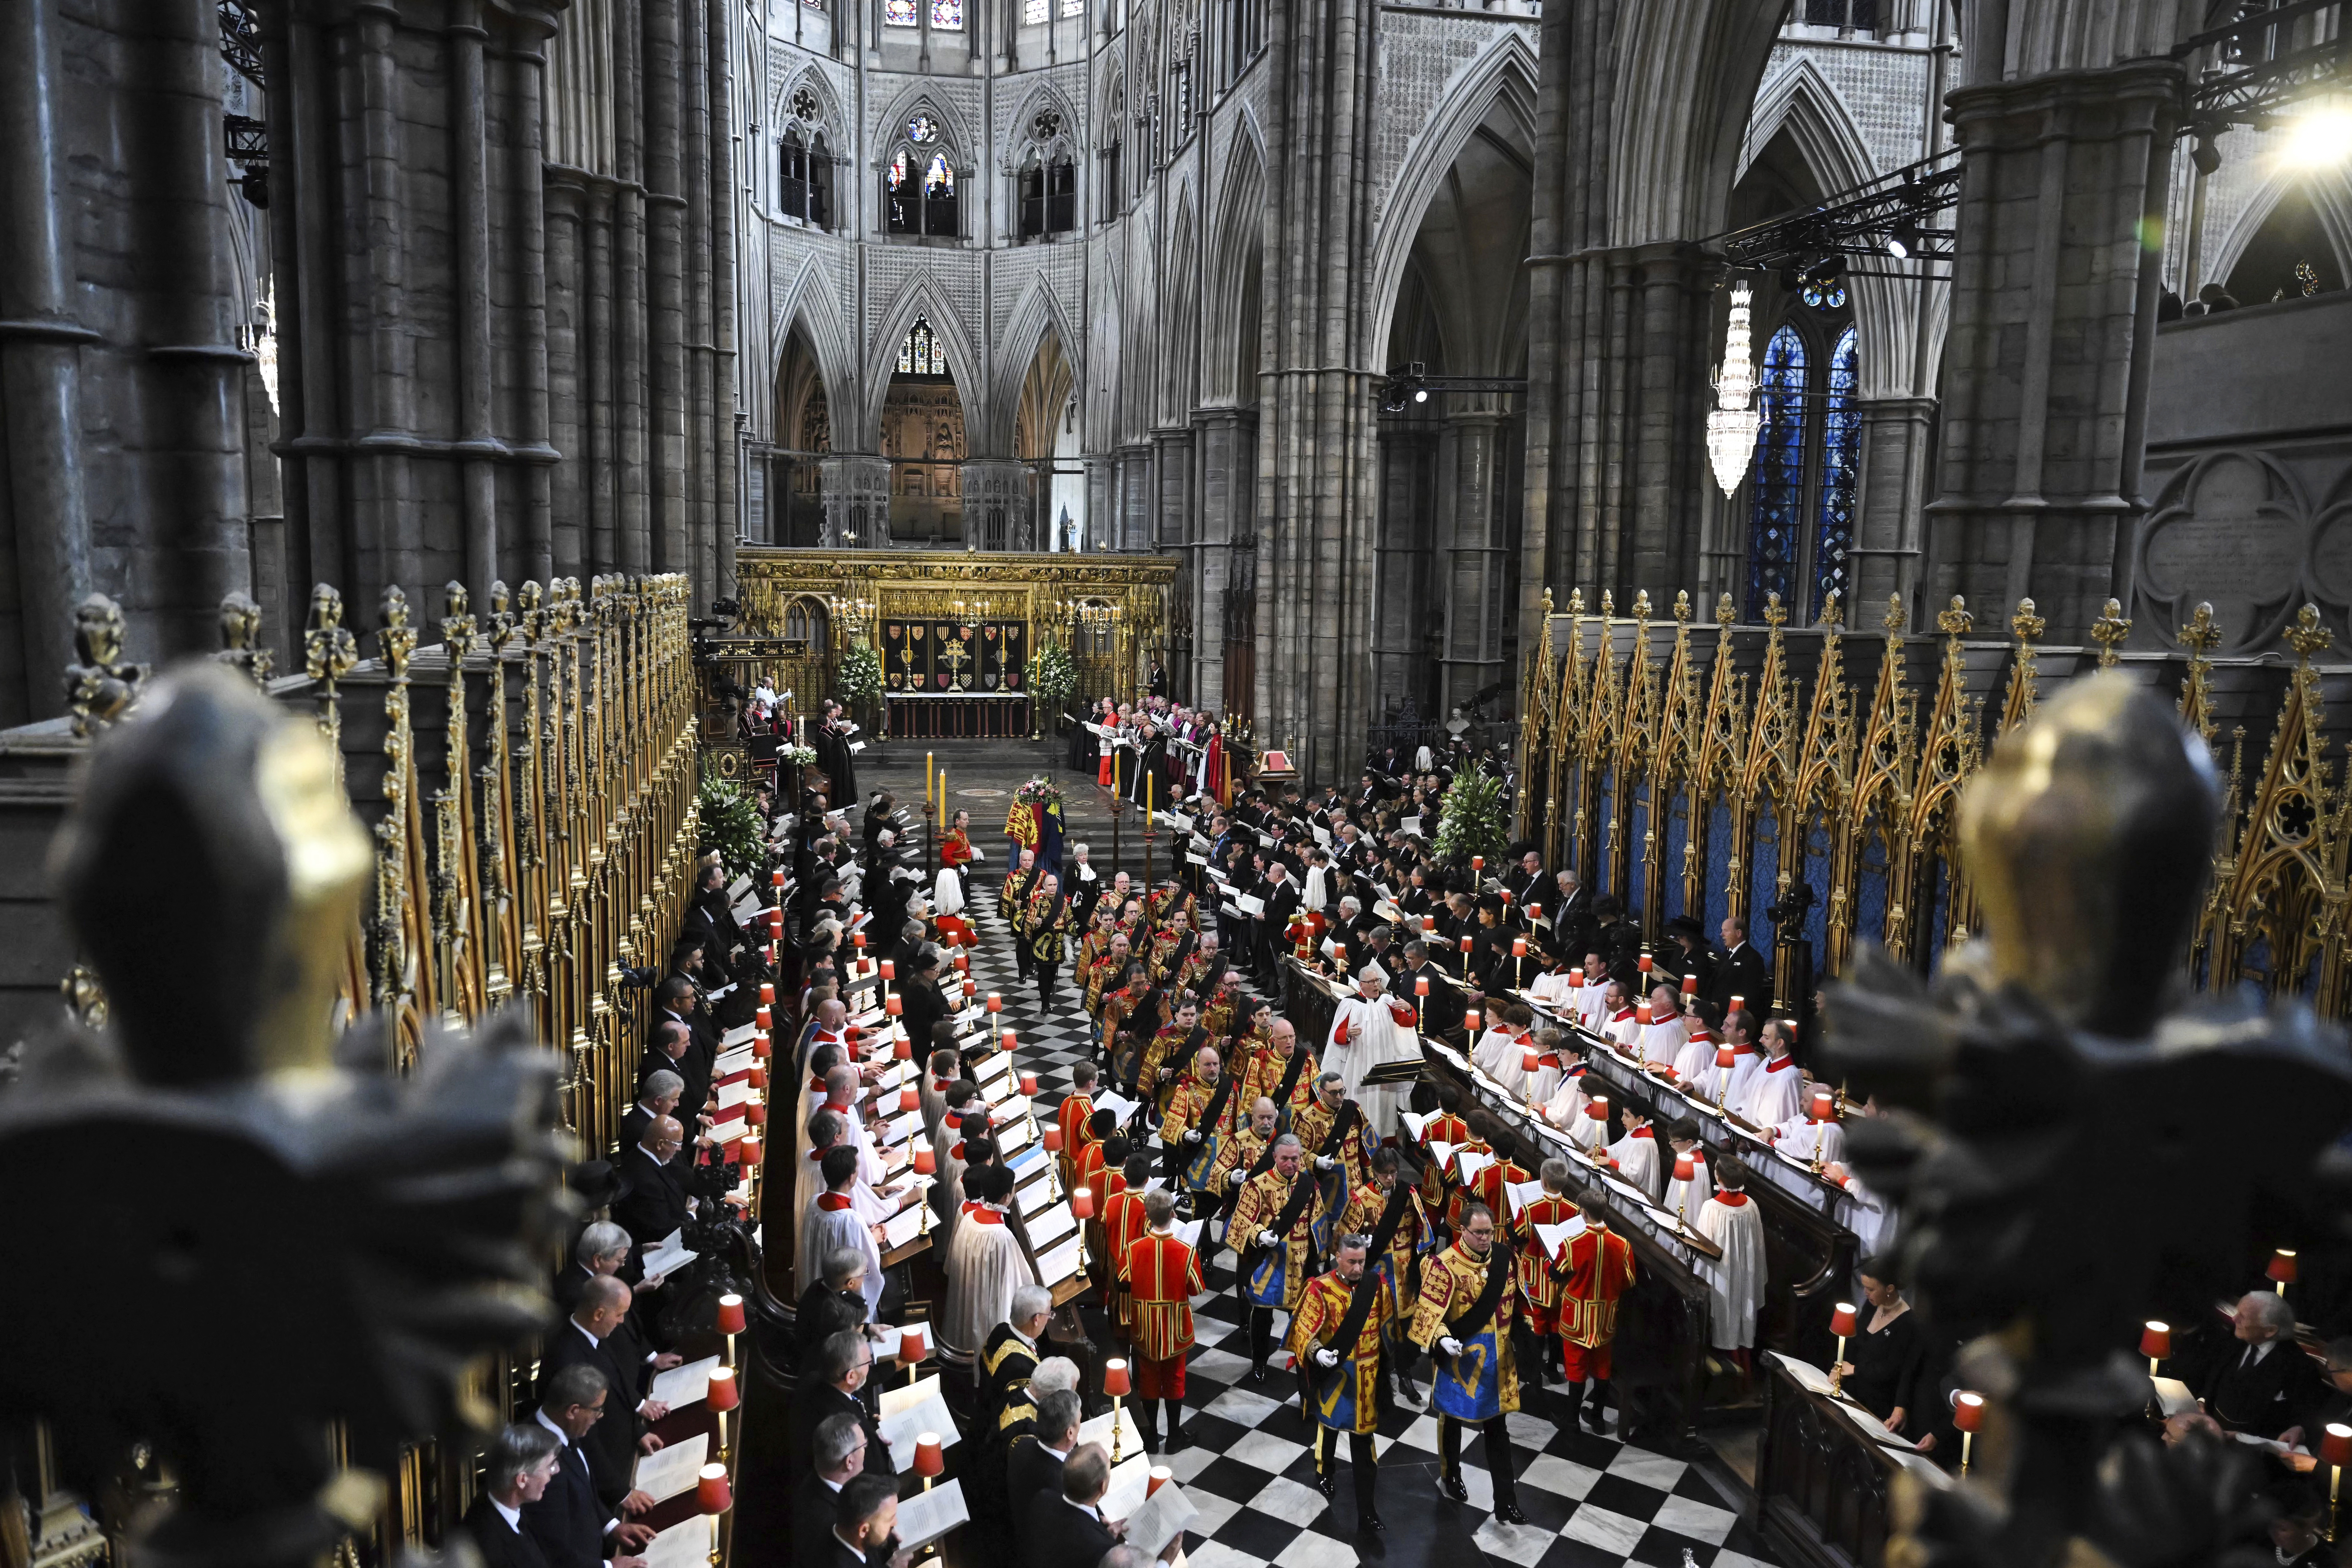 The funeral of Queen Elizabeth II in Westminster Abbey in central London, Monday Sept. 19, 2022. The Queen, who died aged 96 on Sept. 8, will be buried at Windsor alongside her late husband, Prince Philip, who died last year. (Ben Stansall/Pool via AP)